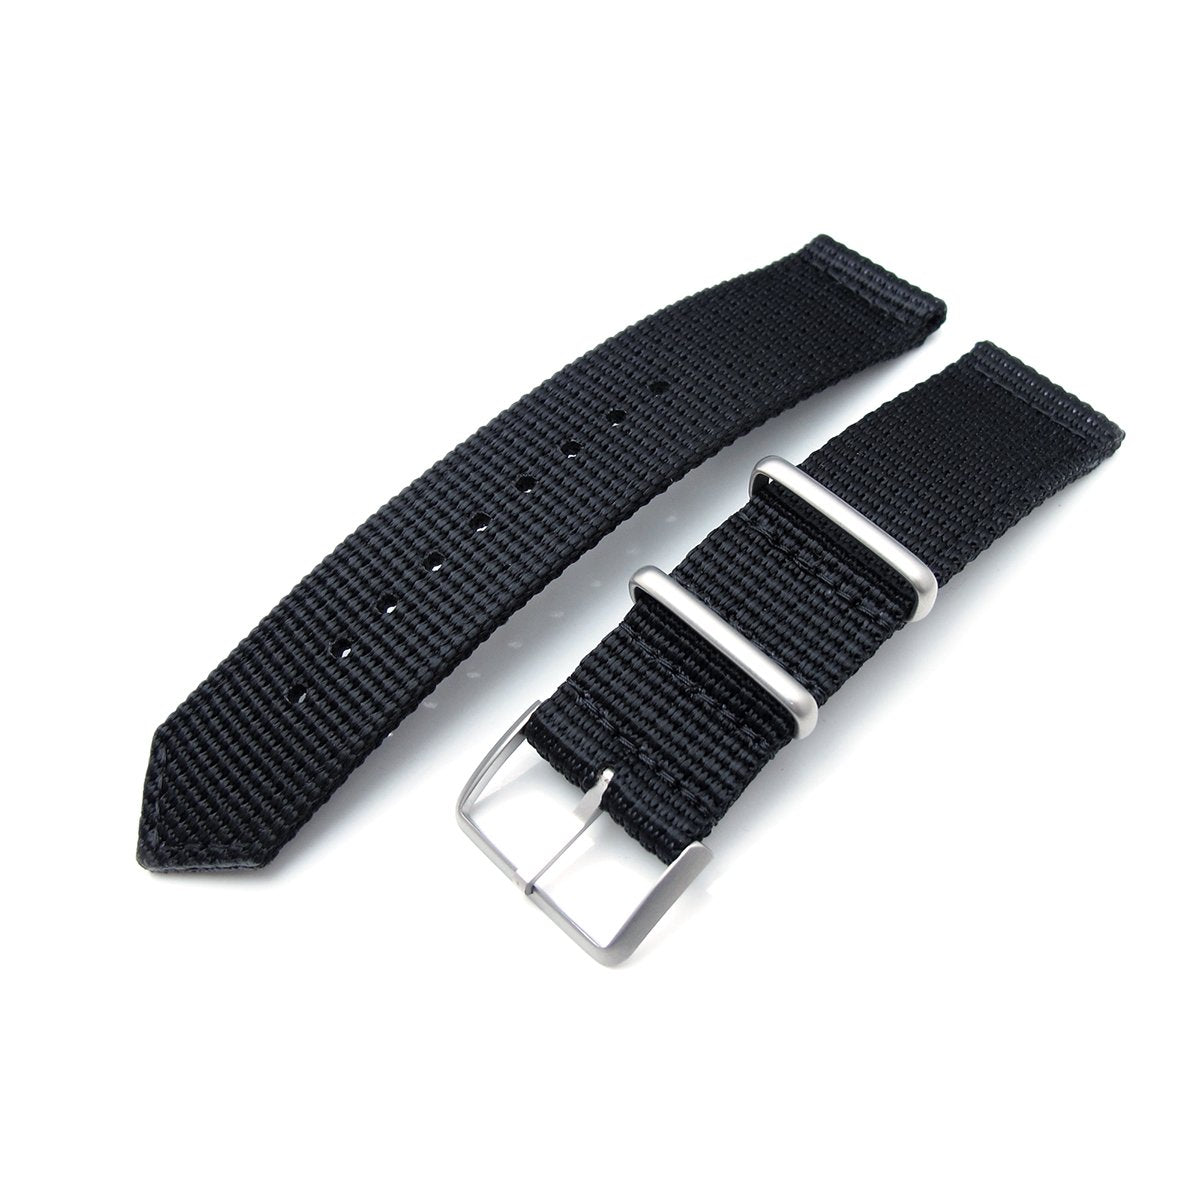 MiLTAT 20mm 22mm Two Piece WW2 G10 Black 3D Nylon Brushed Buckle Strapcode Watch Bands